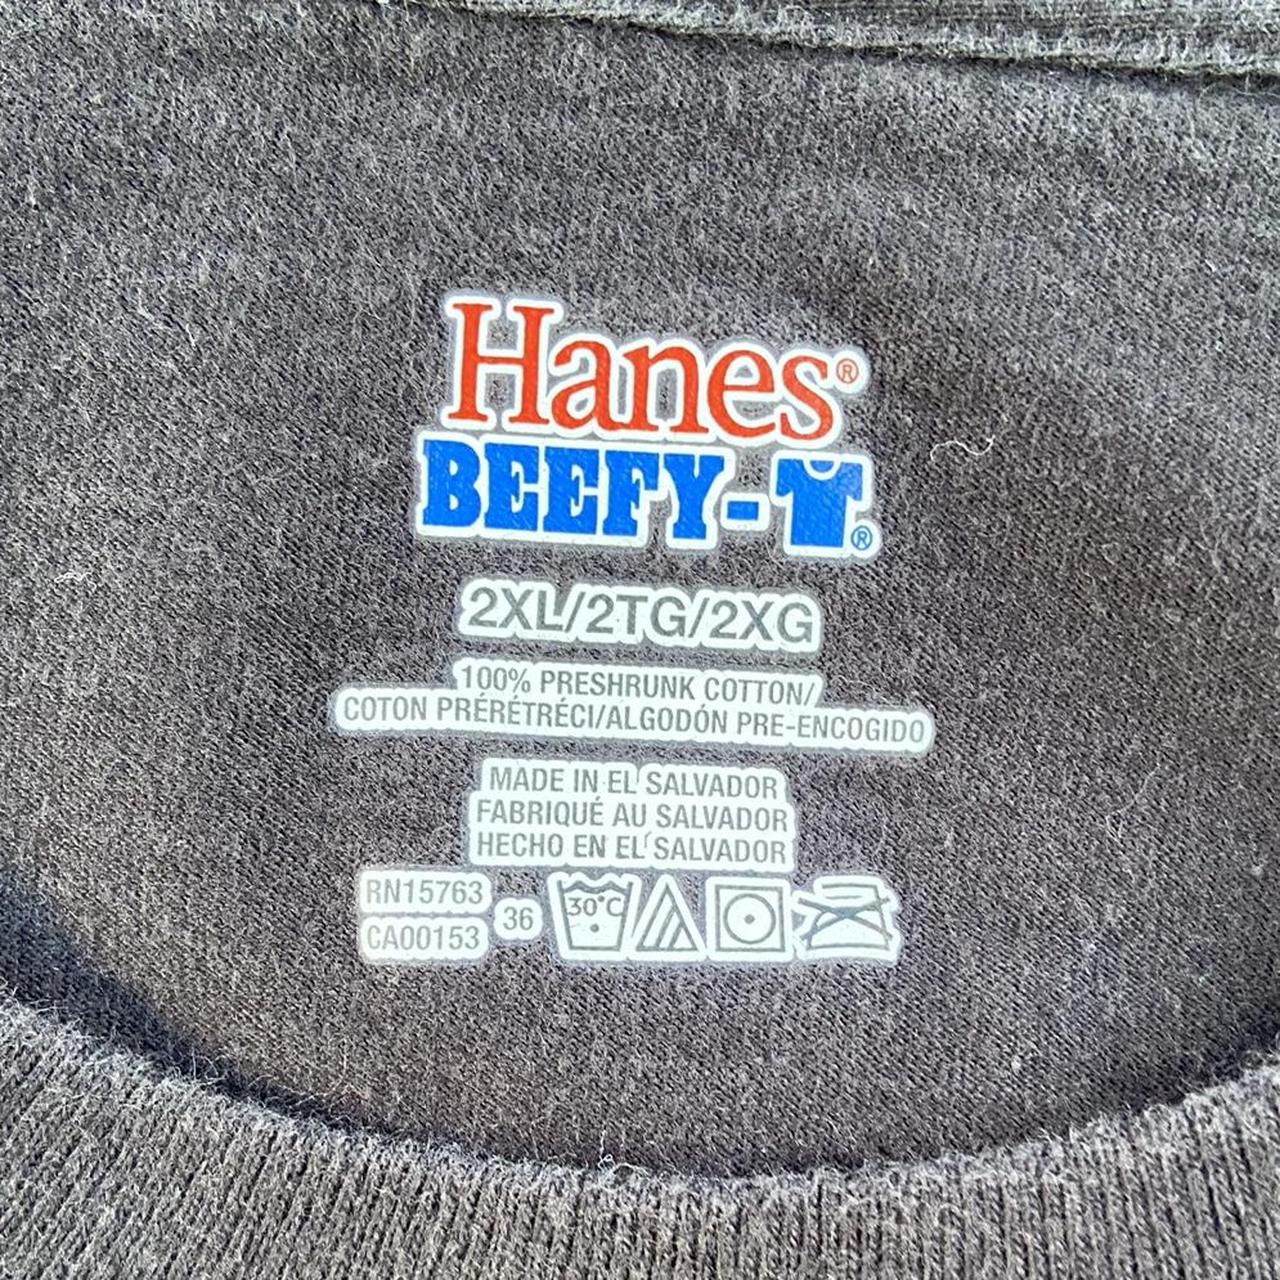 Faded Hanes “Beefy” with text print Size 2XL Free - Depop